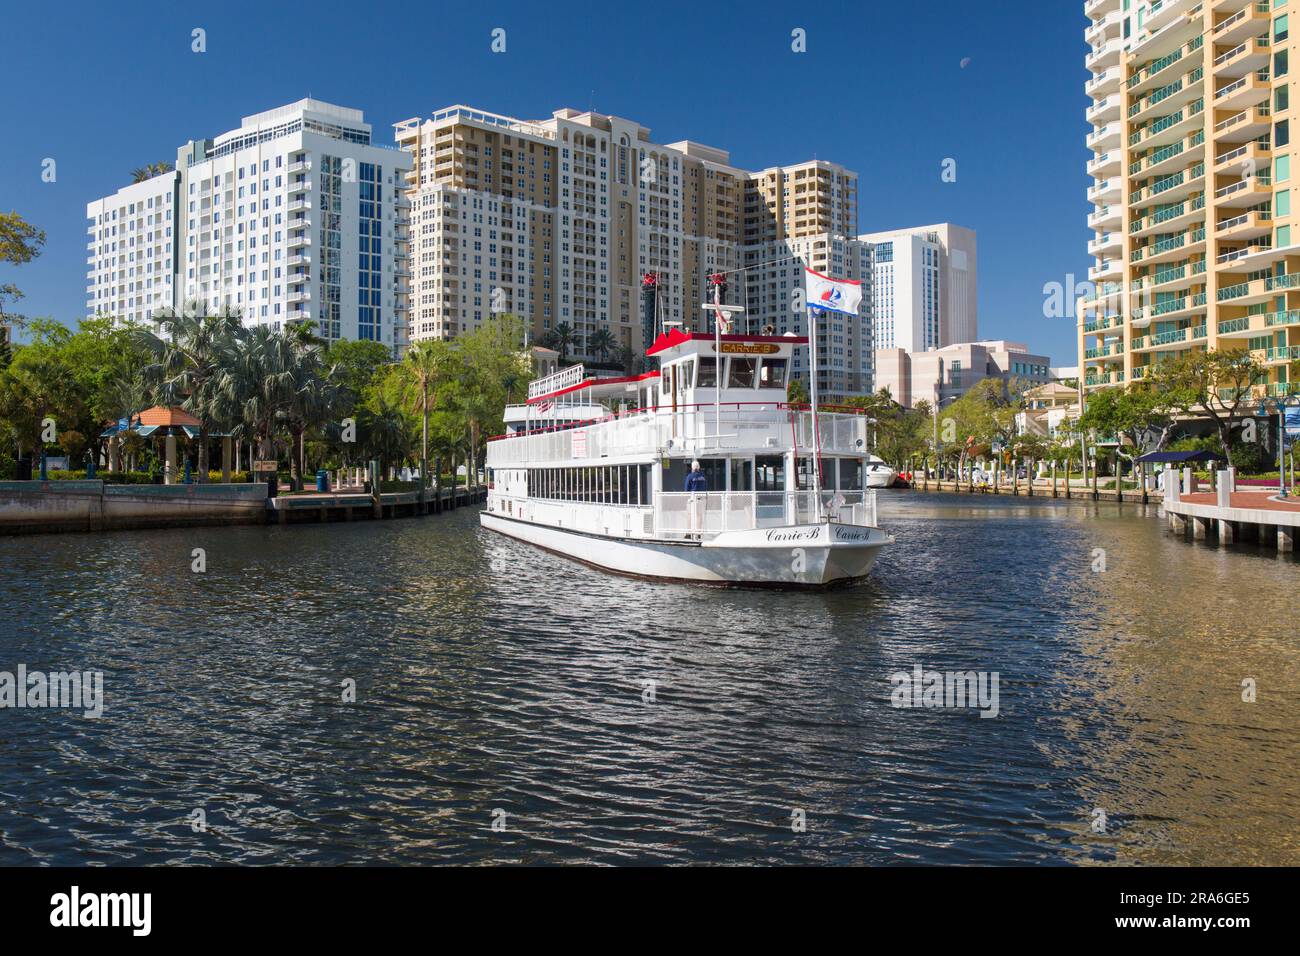 Fort Lauderdale, Florida, USA. Iconic paddleboat, the Carrie B, dwarfed by high-rise Downtown condominiums lining the New River. Stock Photo